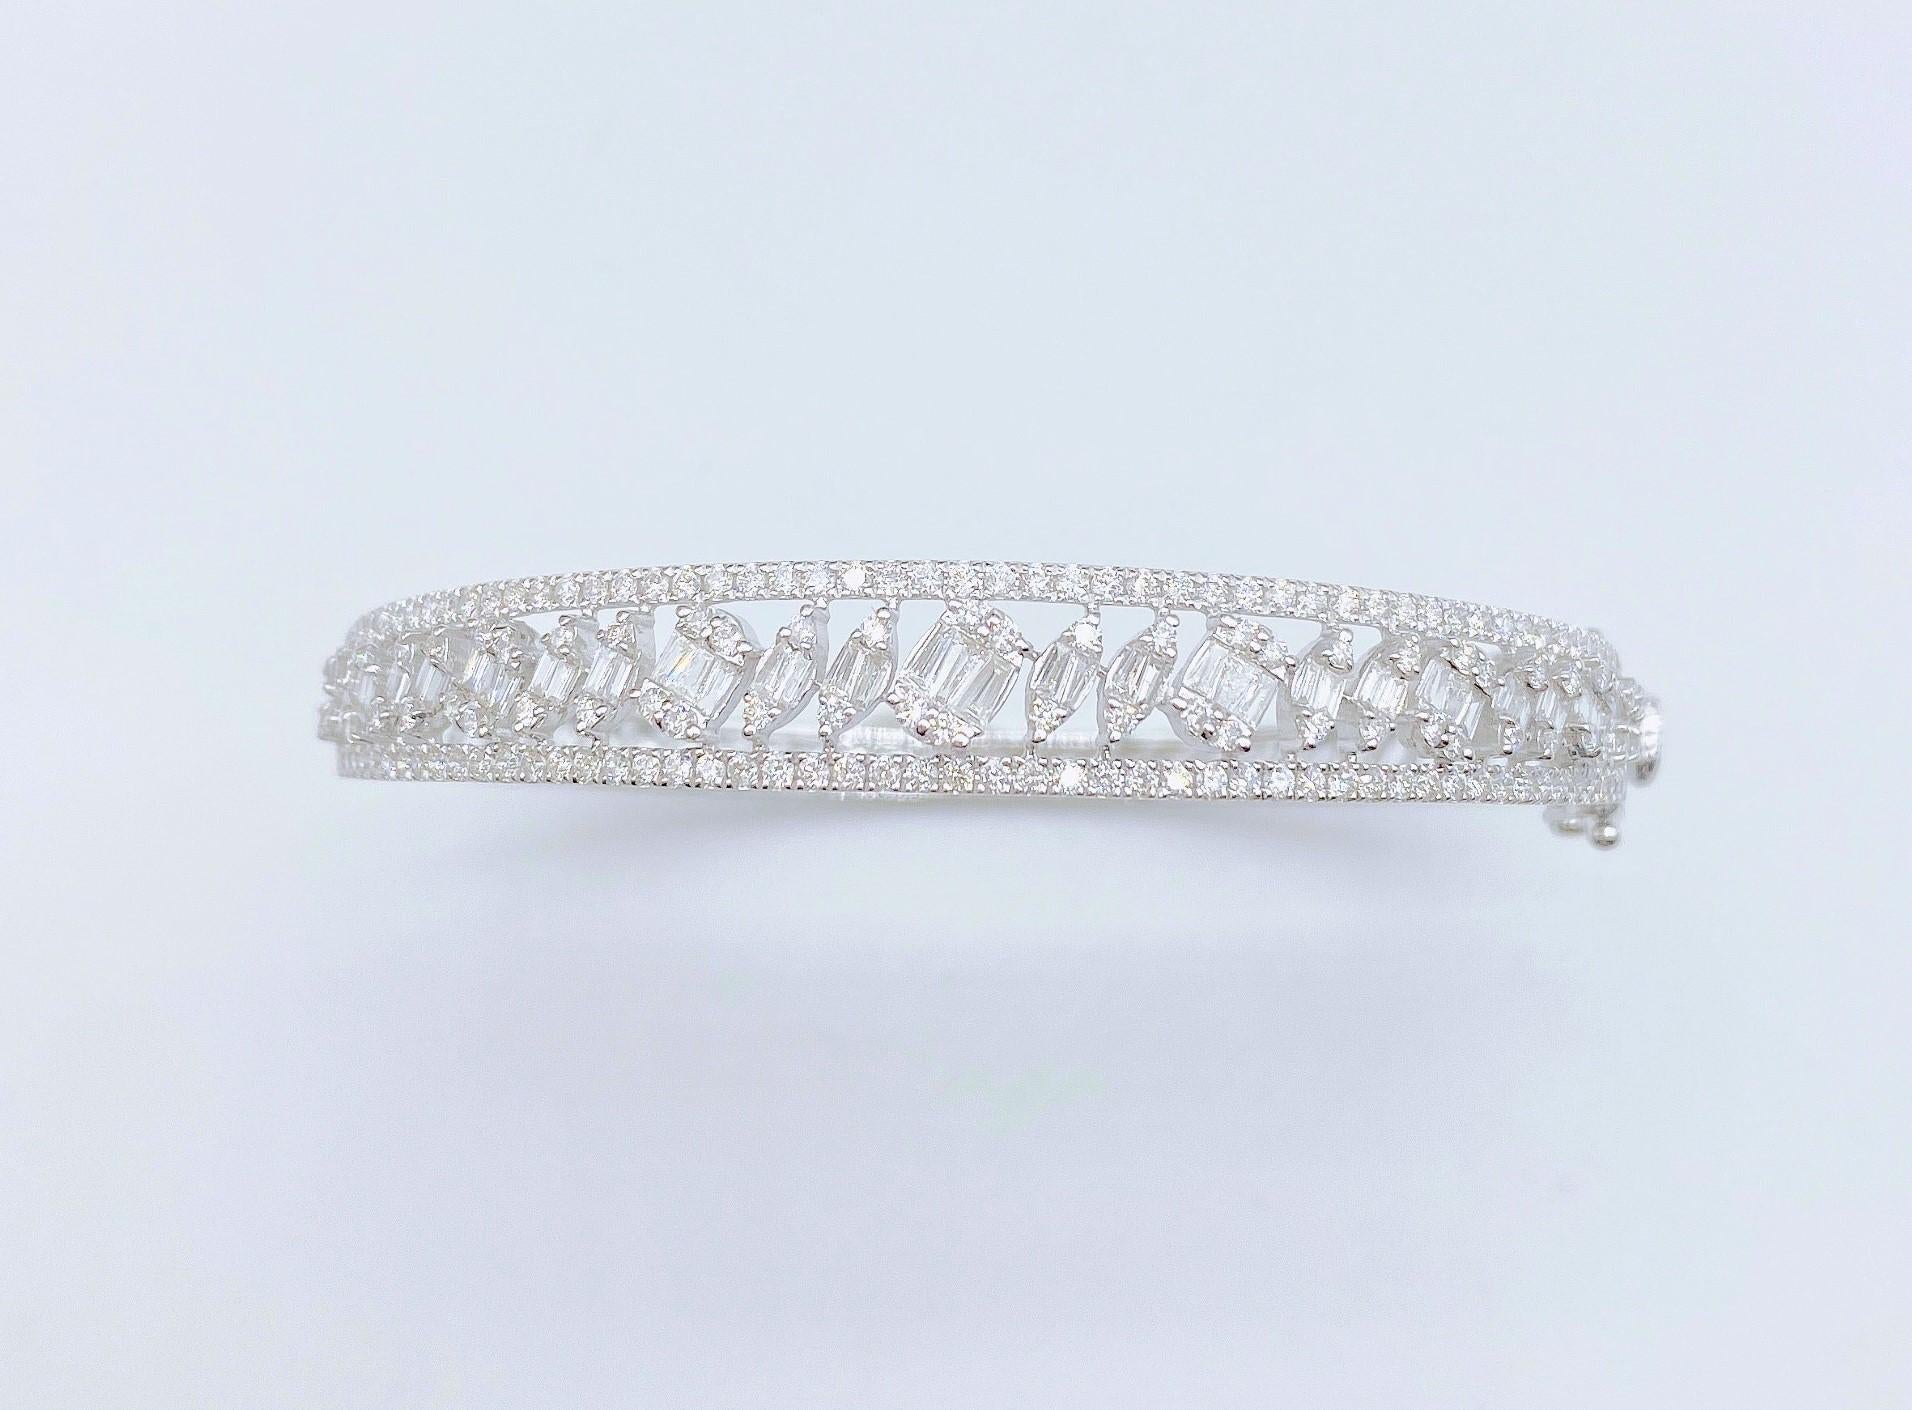 The Following Item we are offering is this Beautiful Rare Important 18KT White Gold Glittering Diamond Bangle Bracelet. Bracelet is comprised of Approx 2.00CTS of Magnificent Rare Gorgeous Fancy Trillion Cut Diamonds with Round Glittering